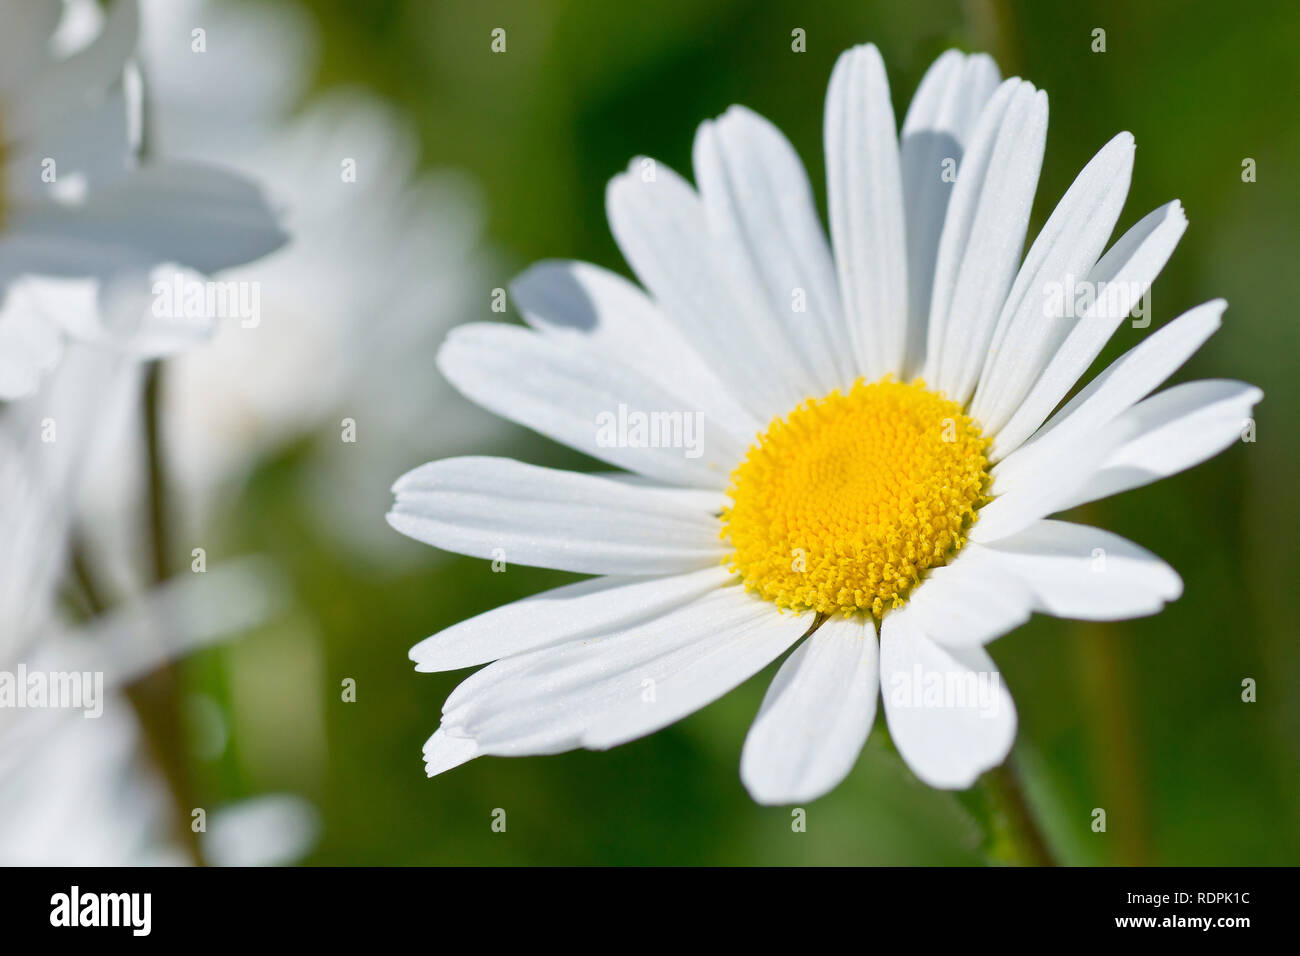 Oxeye Daisy, Dog Daisy or Marguerite (leucanthemum vulgare, also chrysanthemum leucanthemum), close up a single flower out of many. Stock Photo